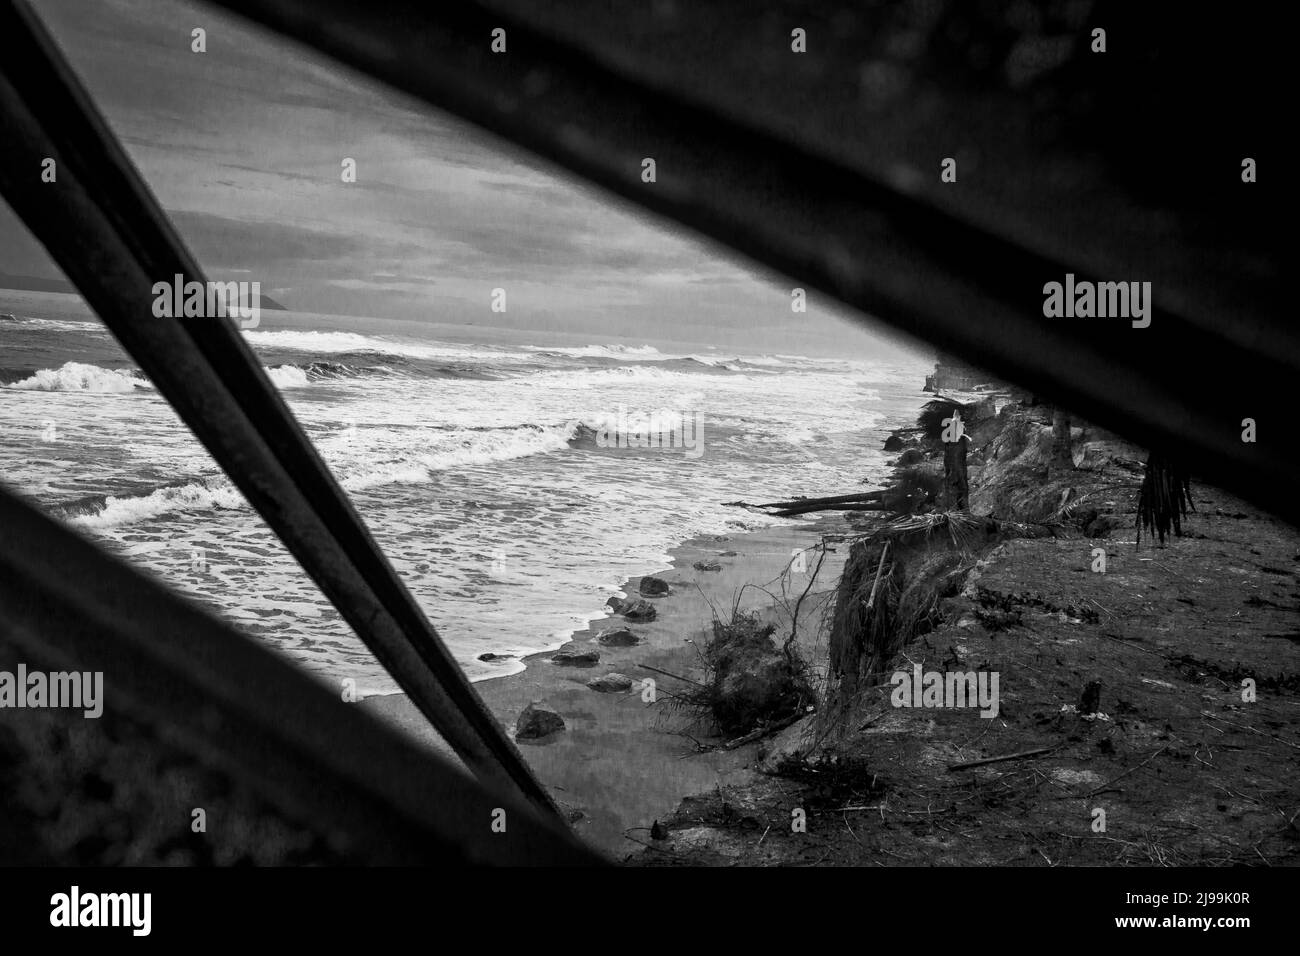 South China Sea coast in Vietnam during a storm peeking out from cover at the beach. B&W. Stock Photo